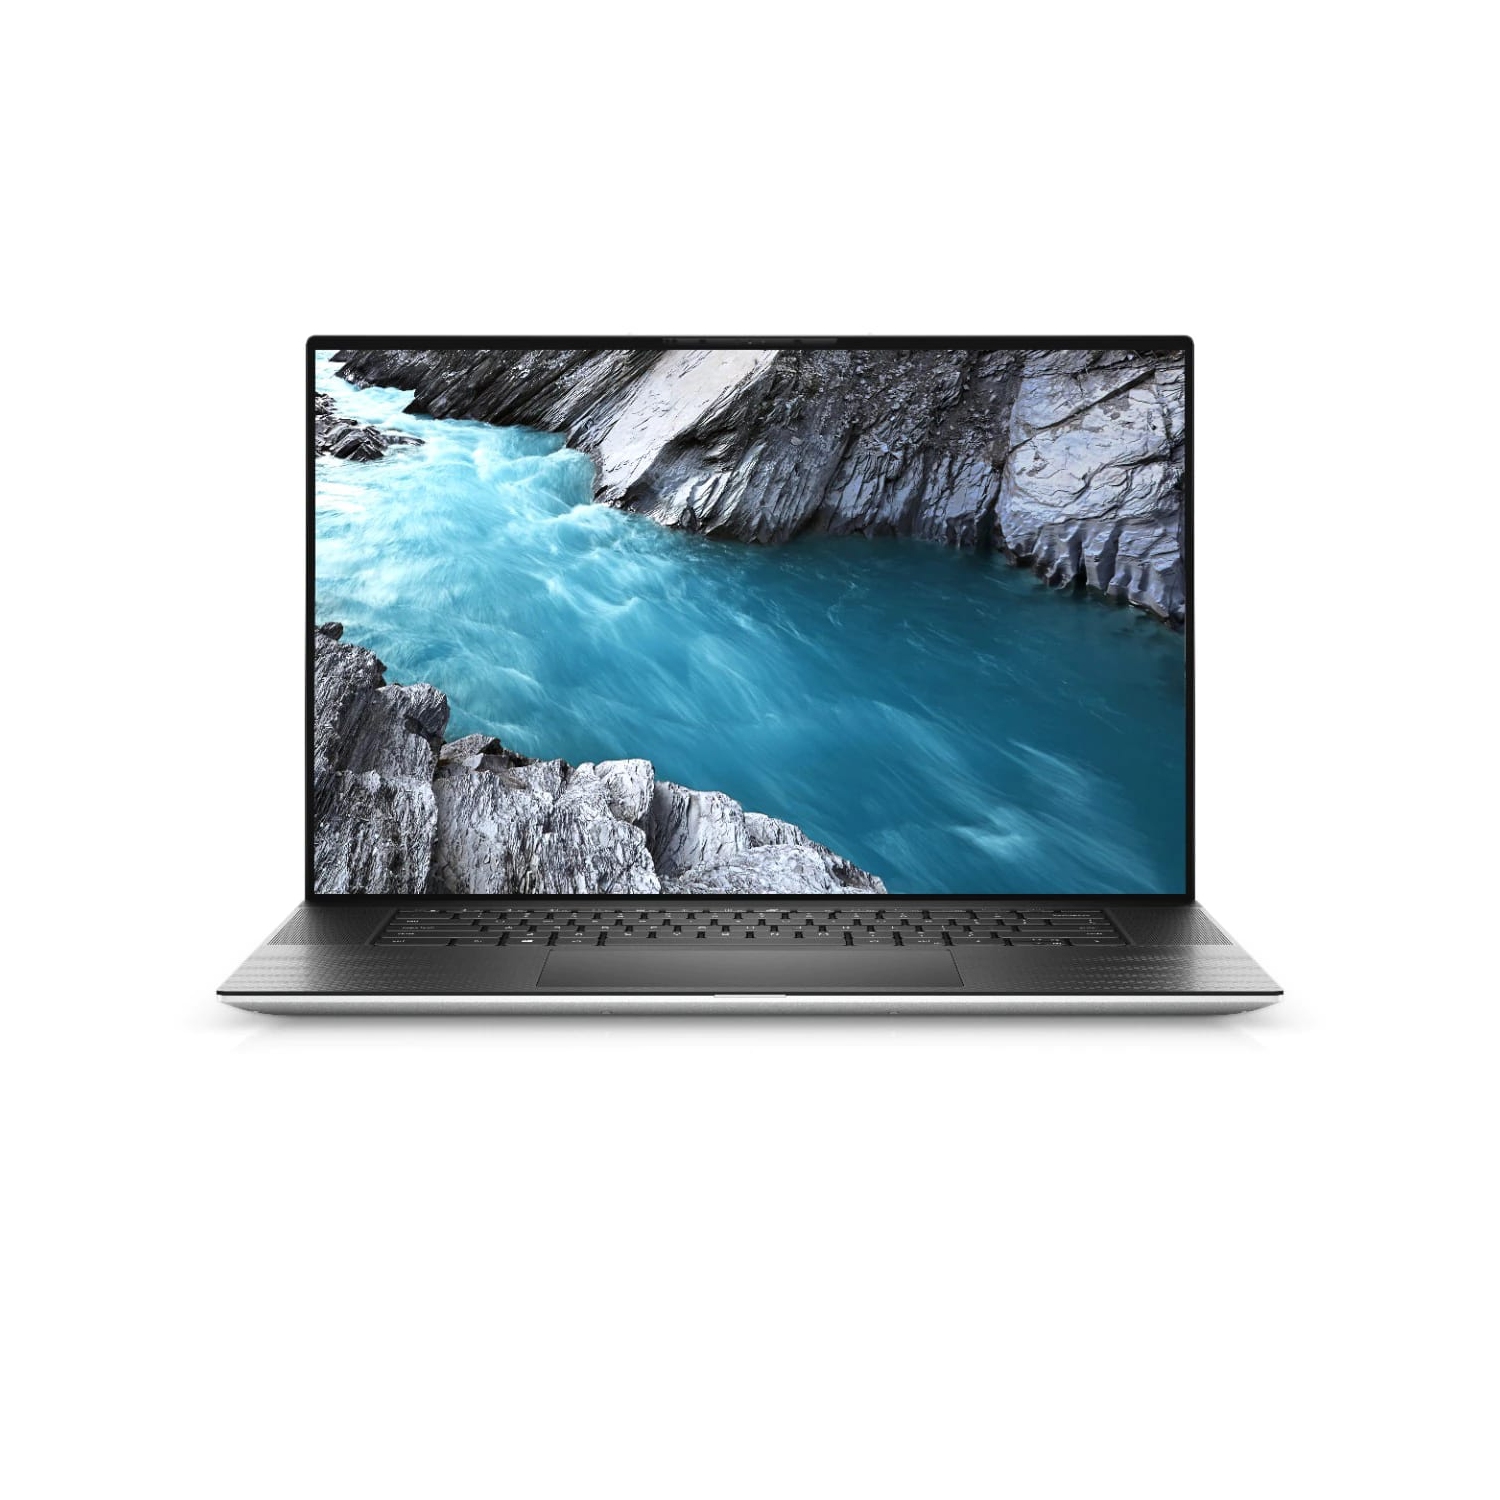 Refurbished (Excellent) - Dell XPS 17 9700 Laptop (2020) | 17" 4K Touch | Core i9 - 1TB SSD - 16GB RAM - RTX 2060 | 8 Cores @ 5.3 GHz - 10th Gen CPU Certified Refurbished